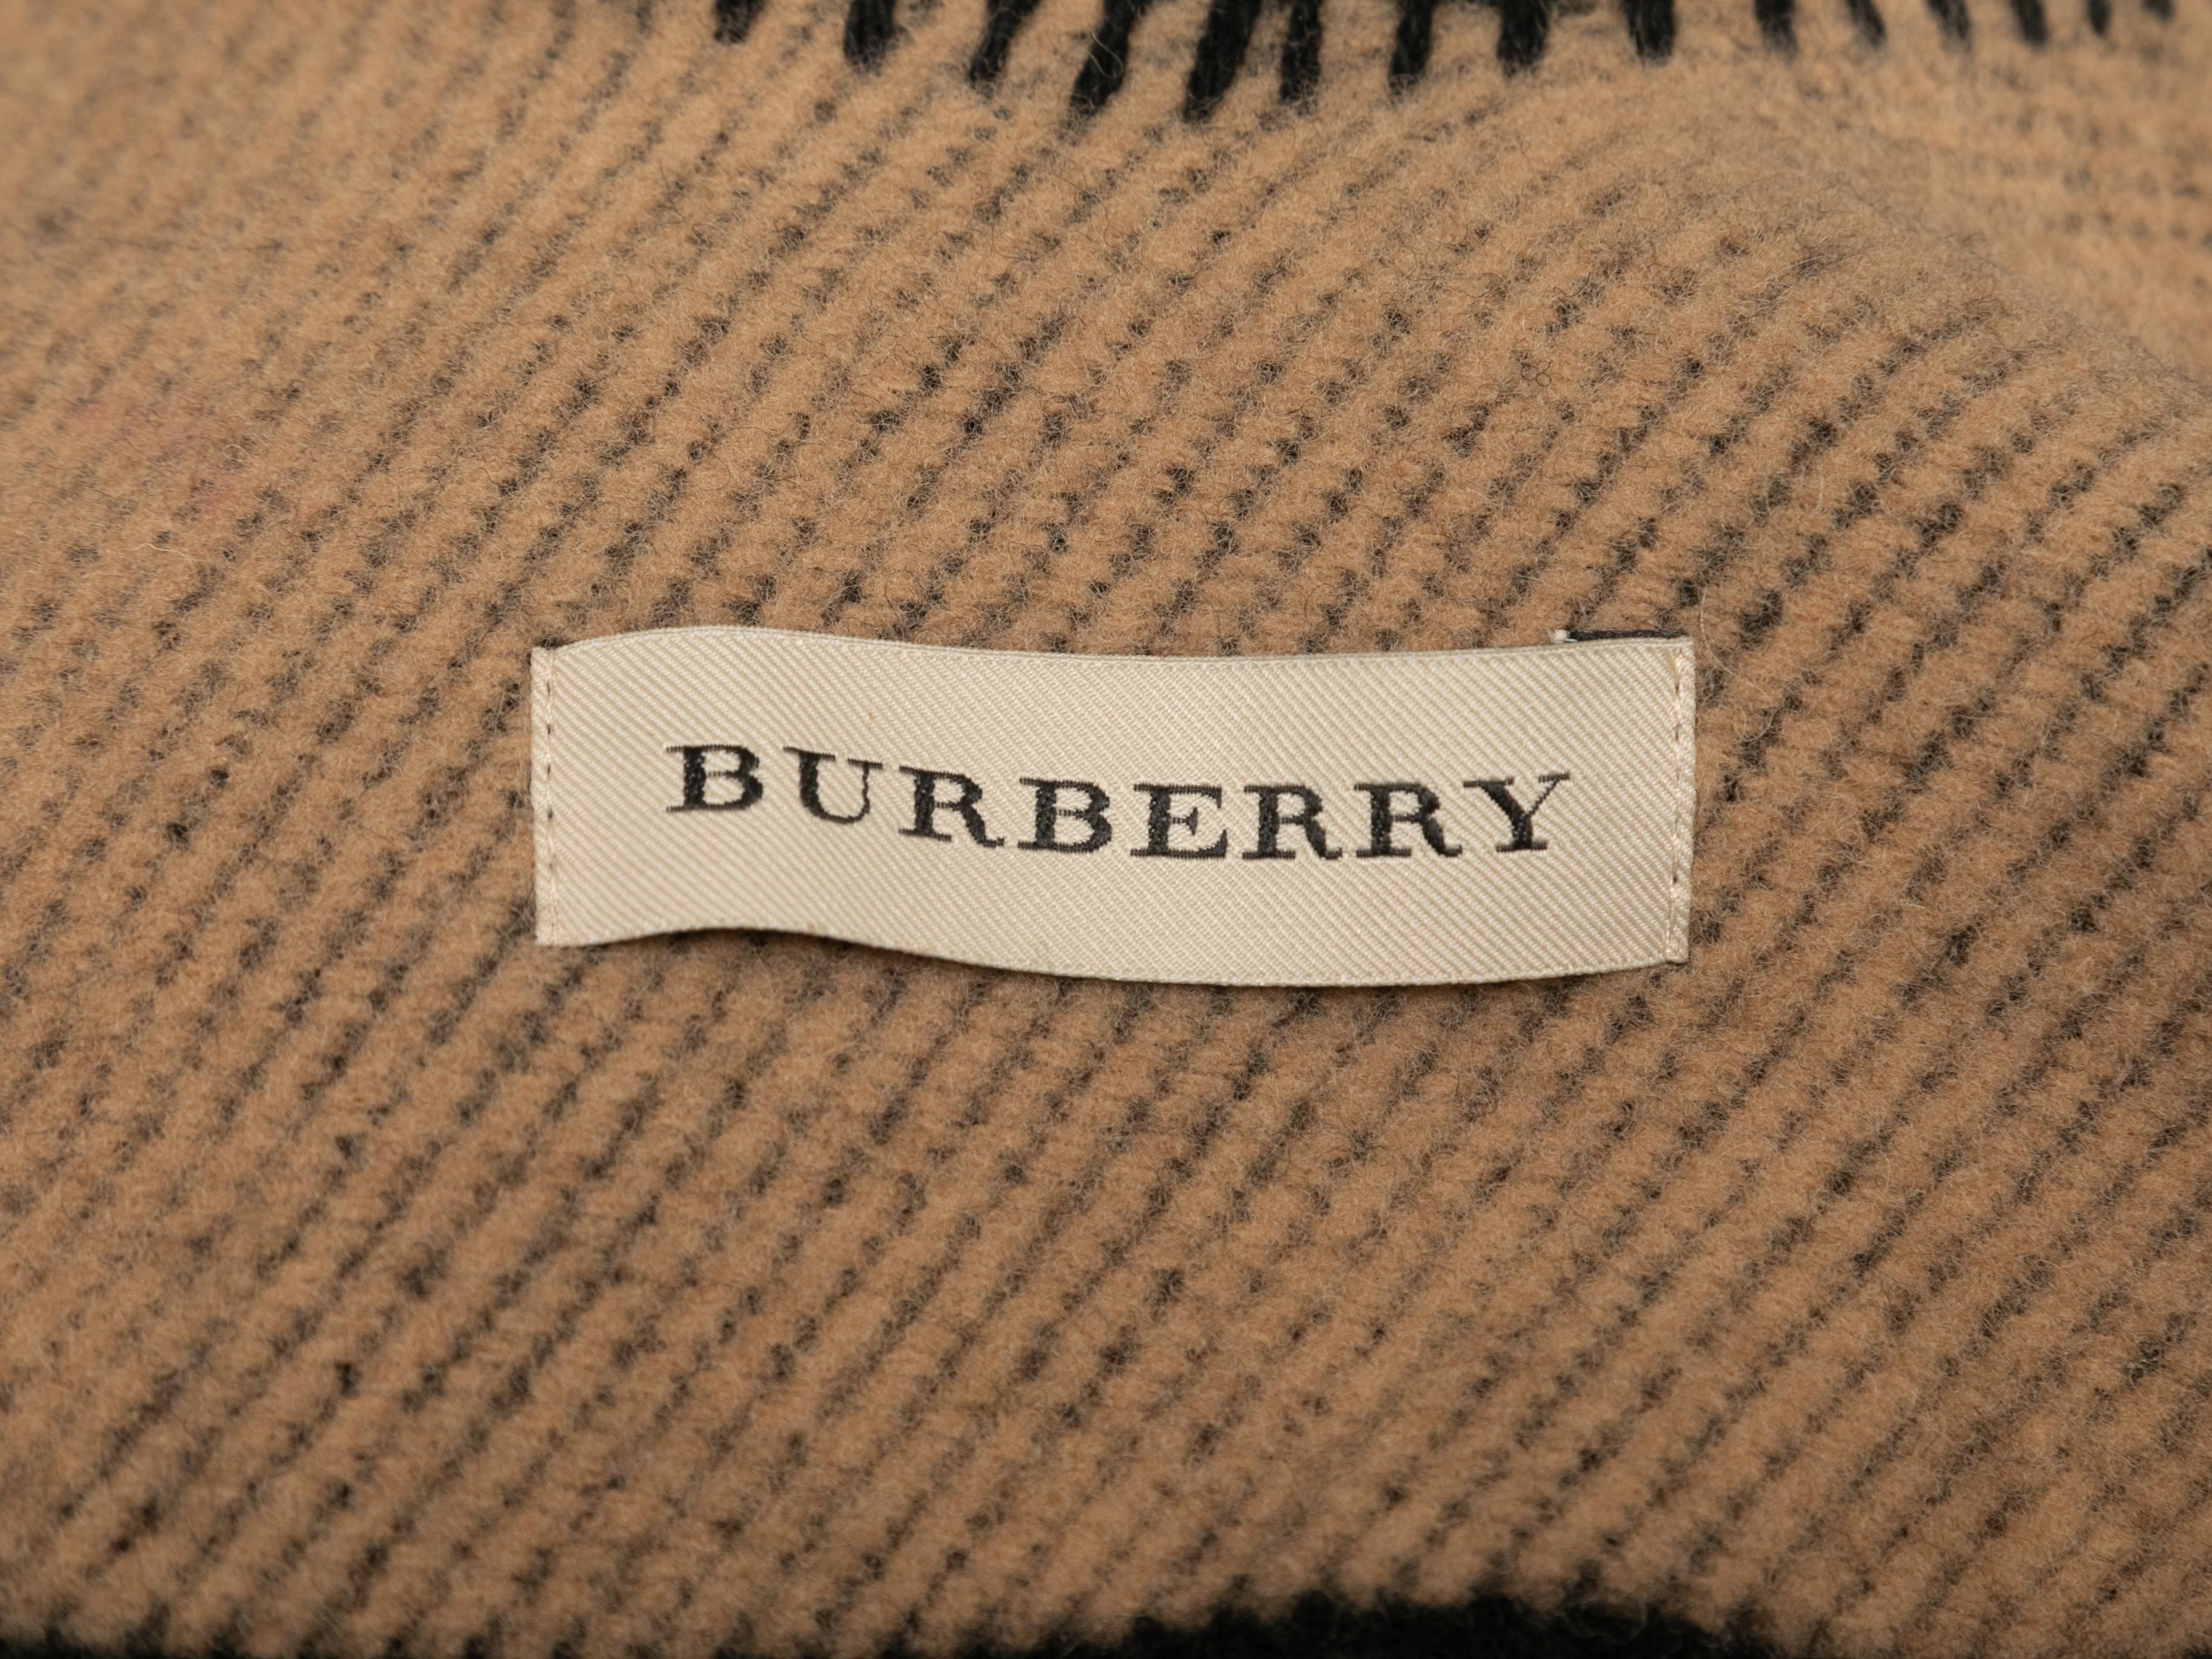 Brown & Black Burberry Knit Cape Size O/S 1